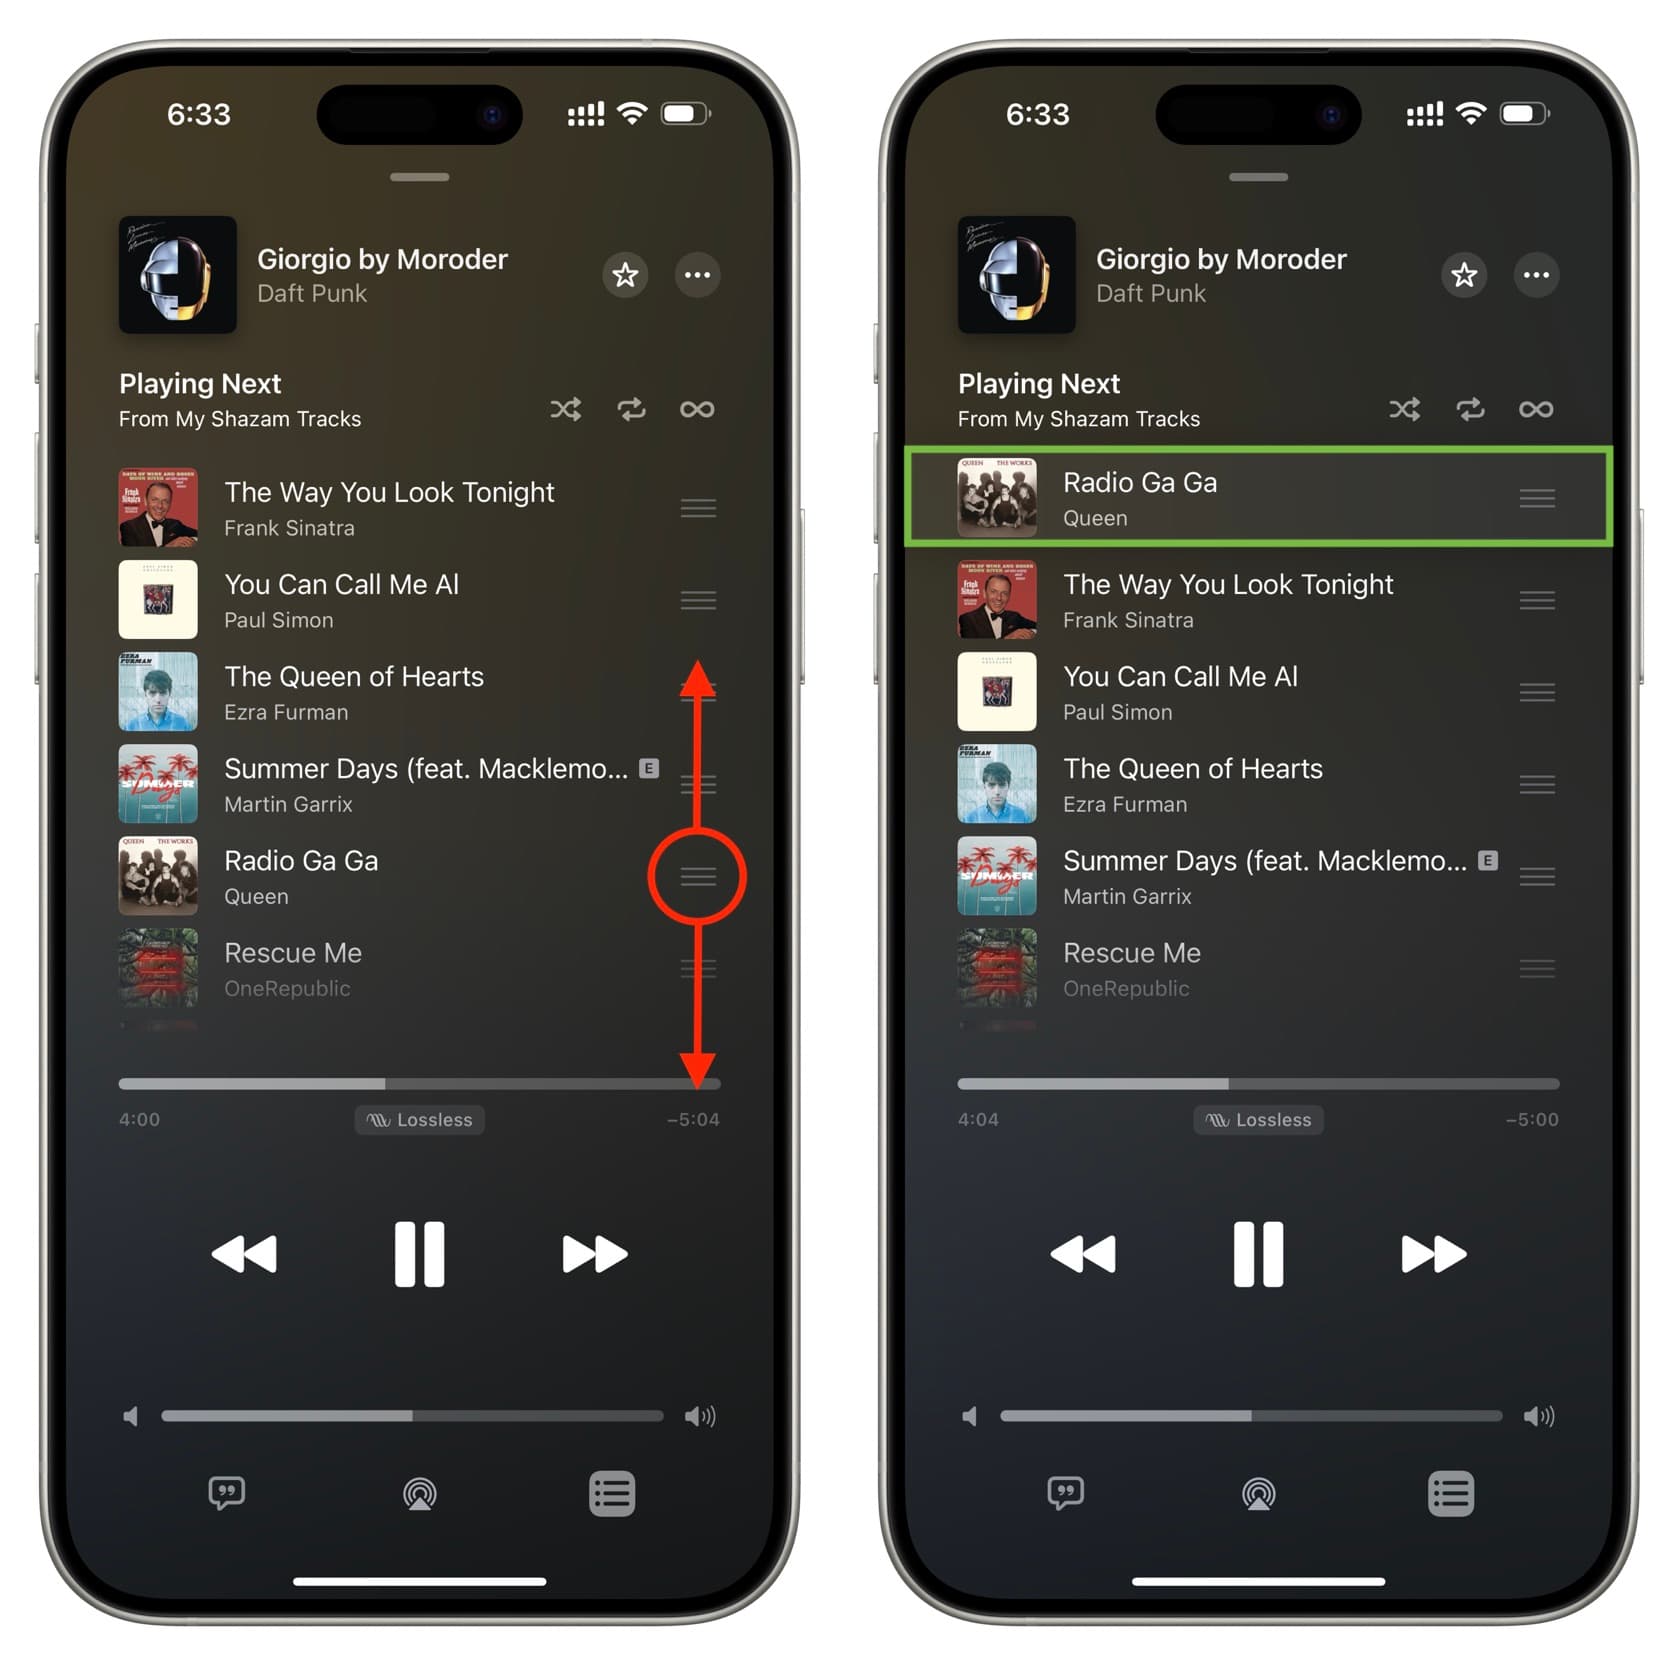 Rearrange songs playing next in the queue in iPhone Music app